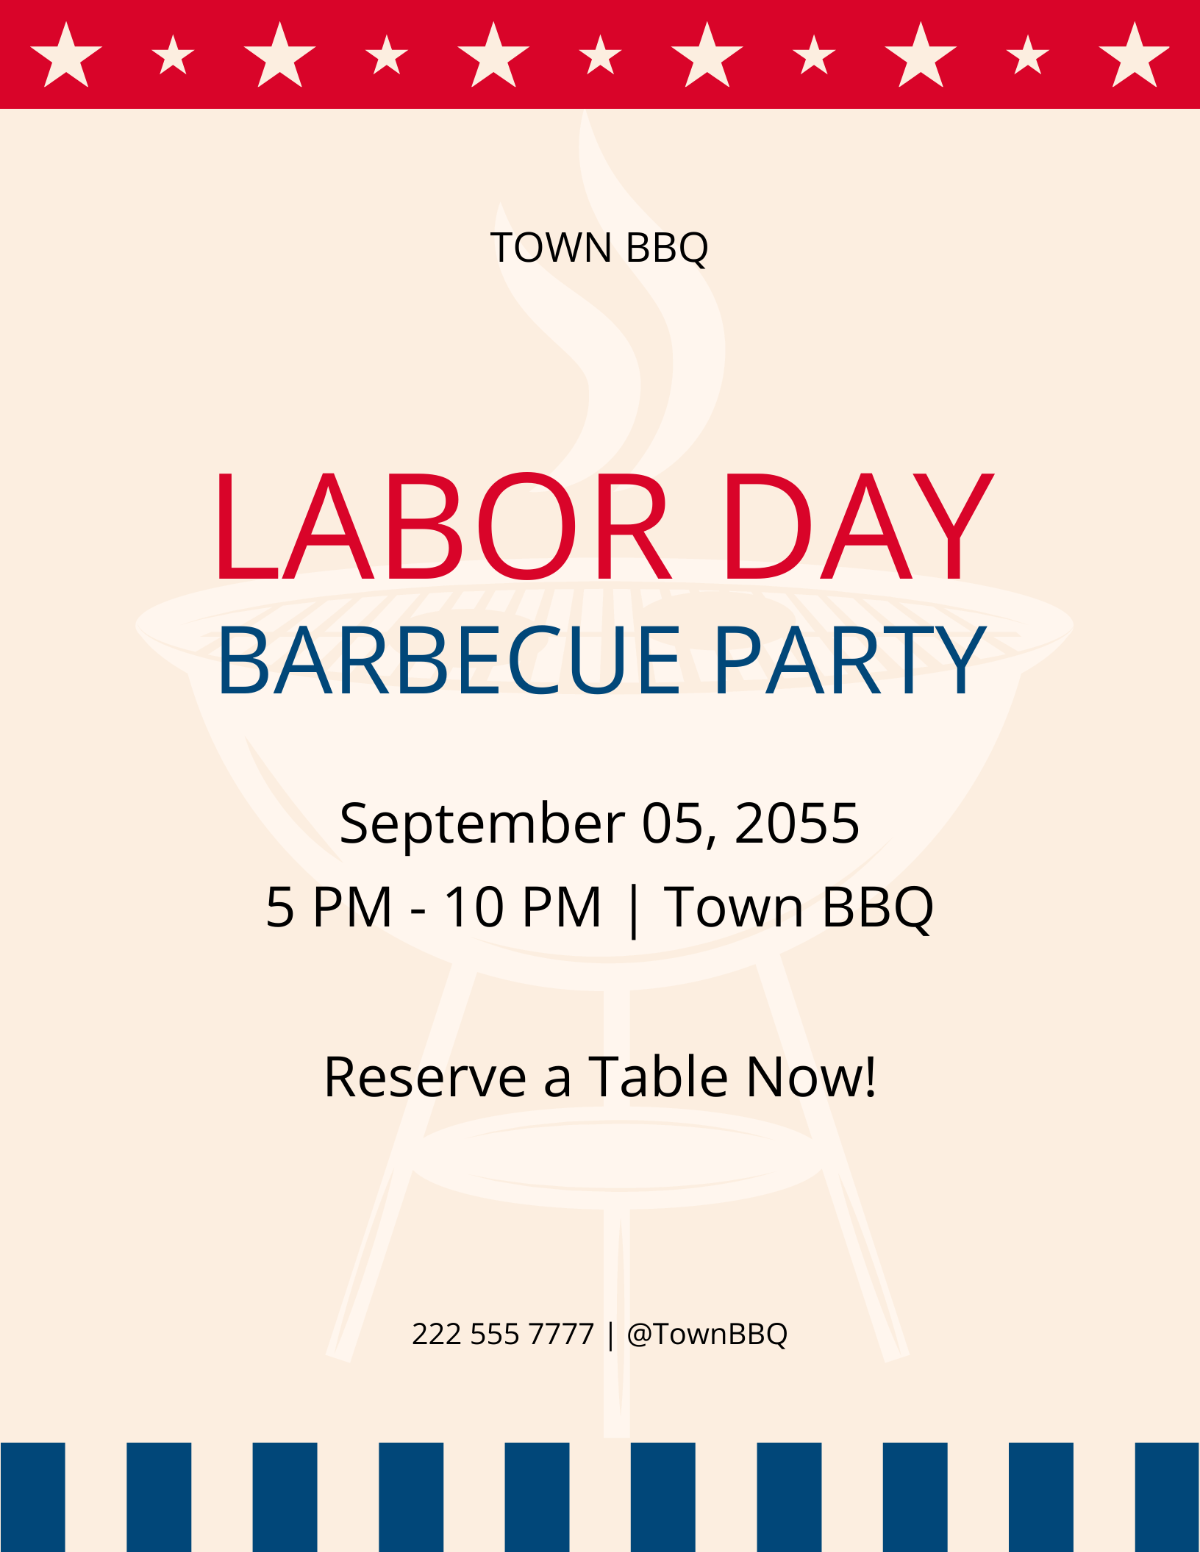 Labor Day Barbecue Party Flyer Template